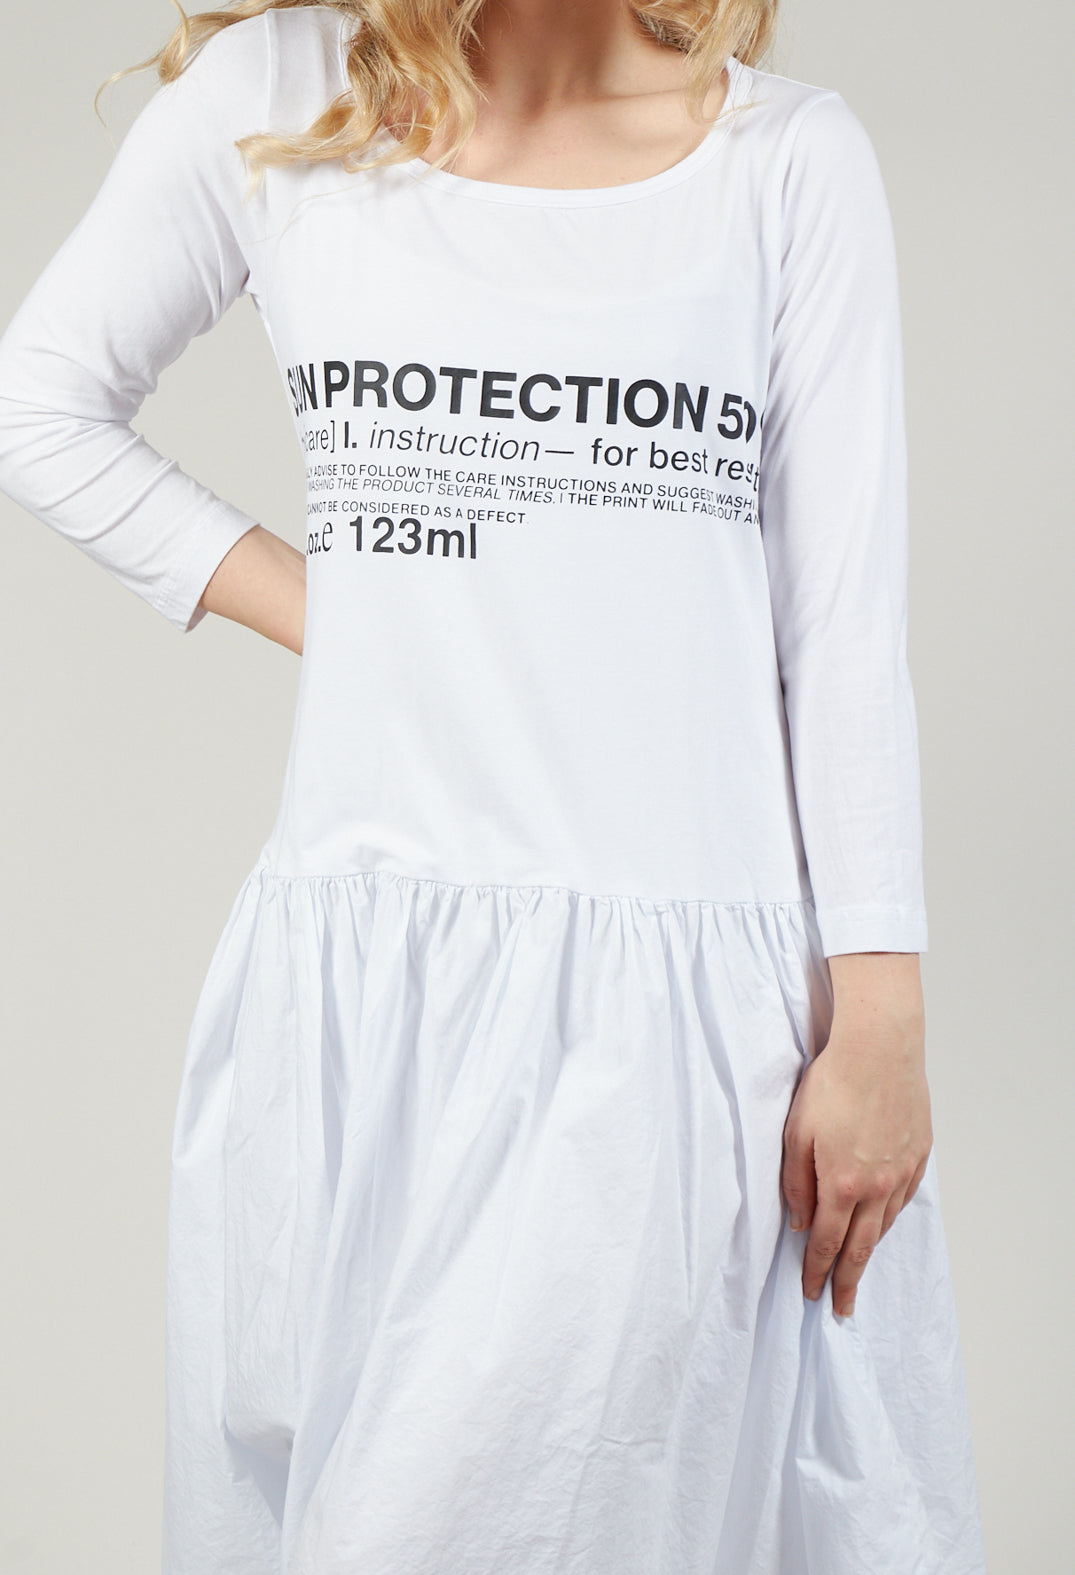 Jersey Top Dress with Lettering Motif in White Print